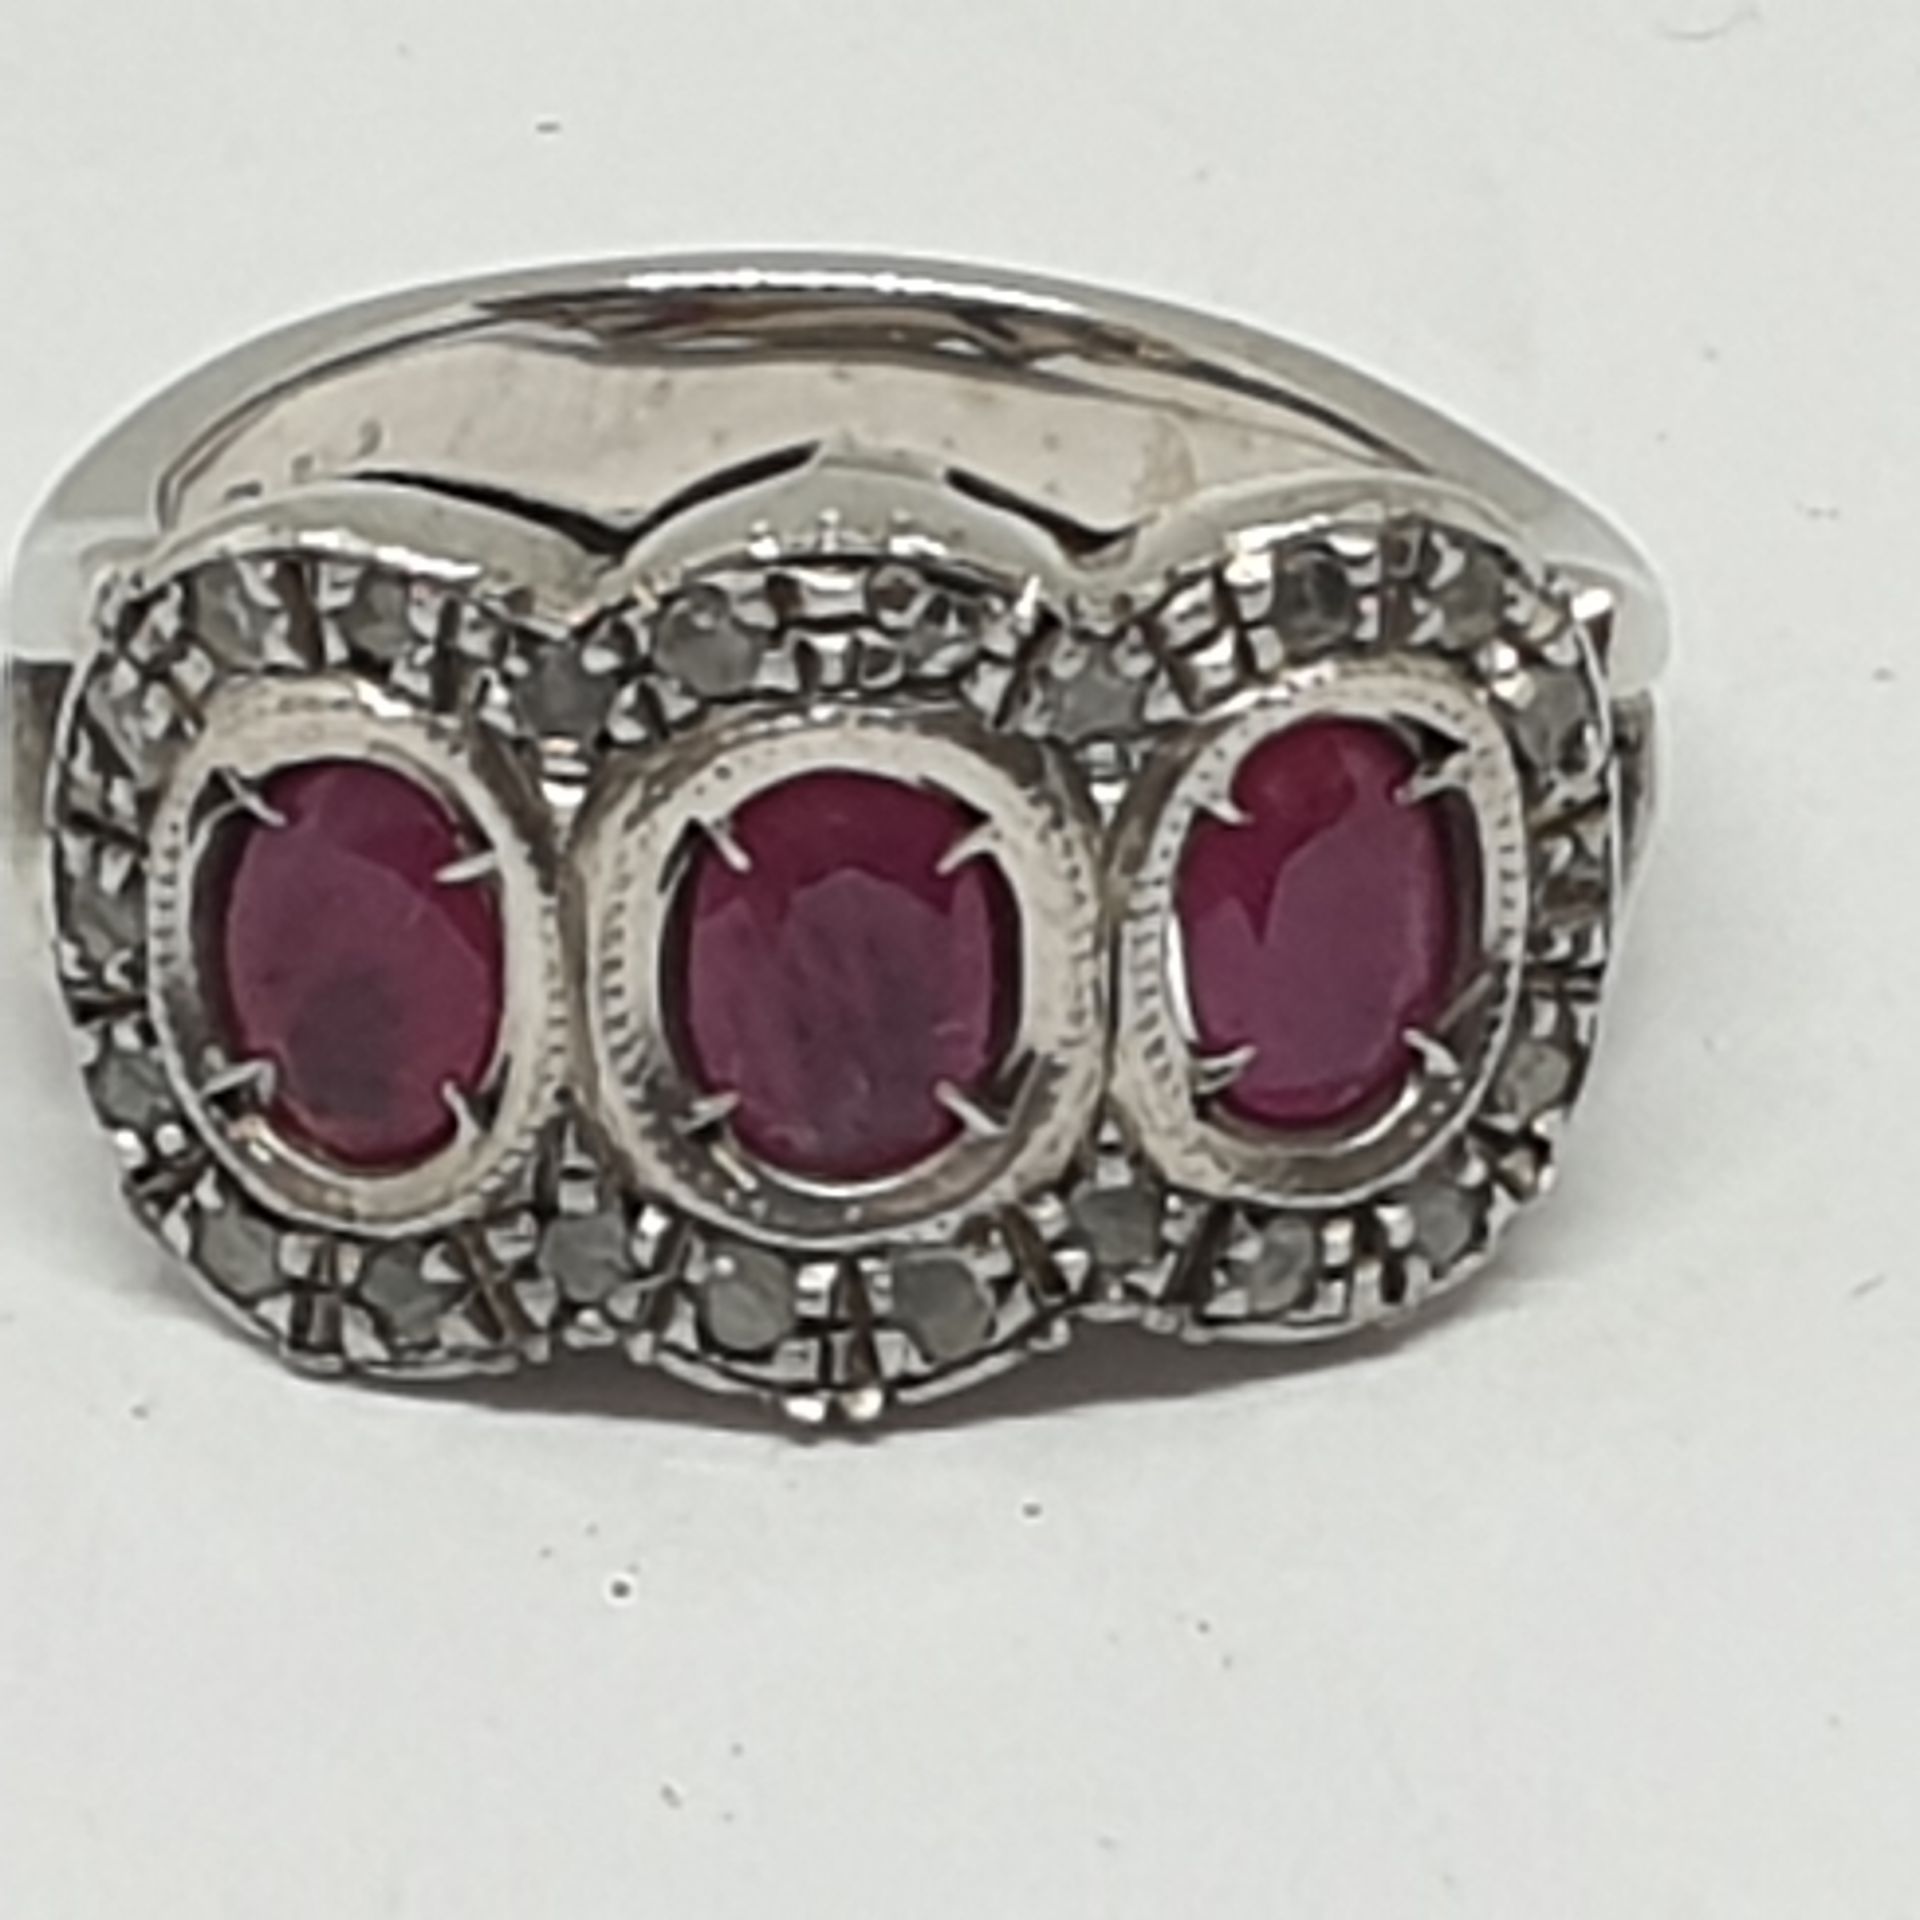 18 K GOLD RING 9.8 WITH 4 CENTRAL OVAL RUBIES FROM APPROXIMATELY 1.12 TOTAL CTS AND ROSETTE - Image 3 of 4